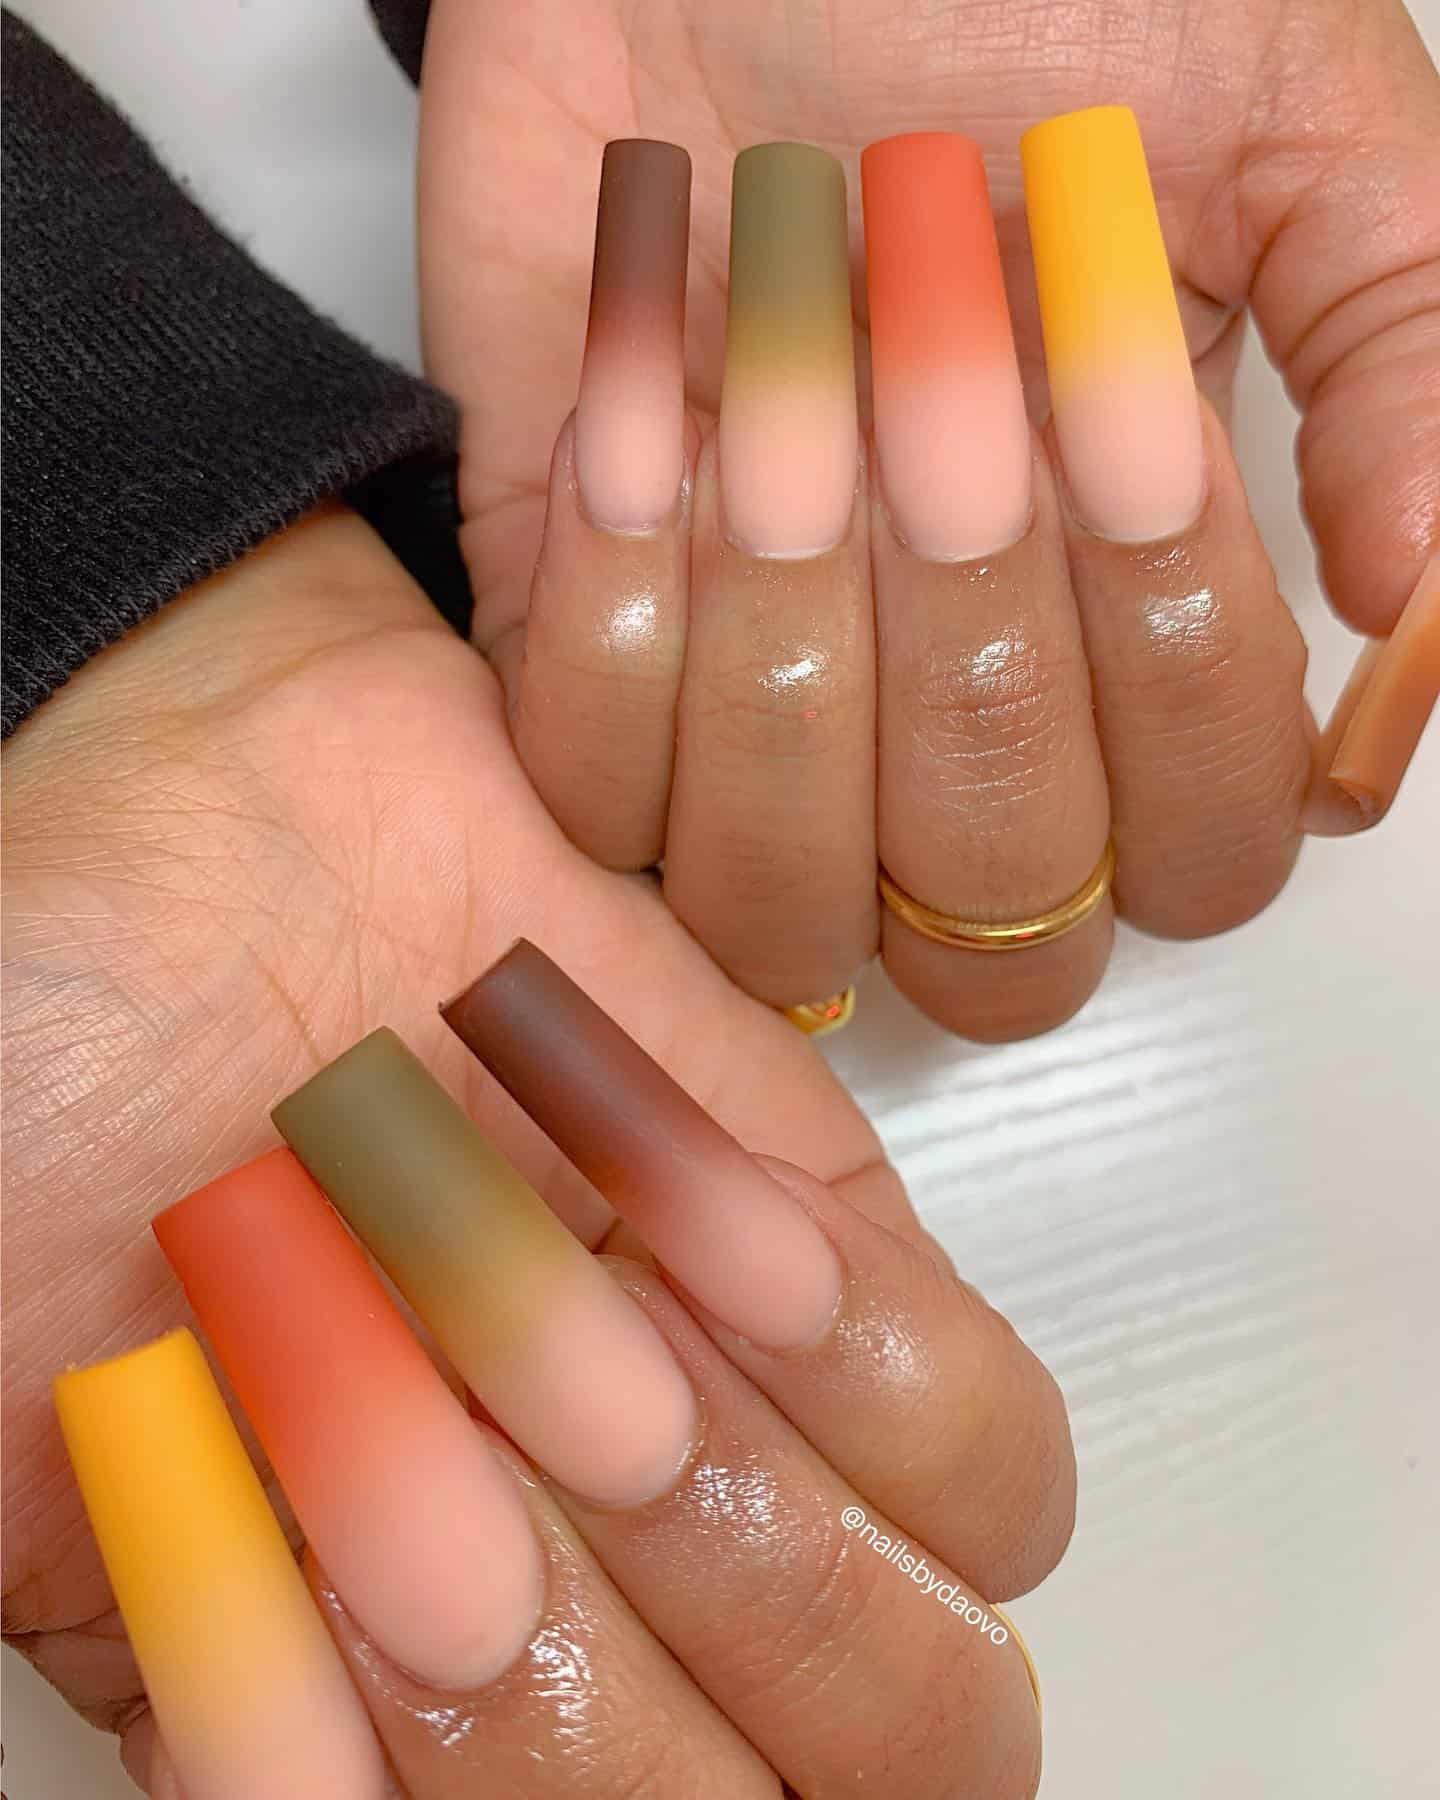 a hand with long square nails painted in matte ombre designs featuring brown, dark green, orange, and yellow